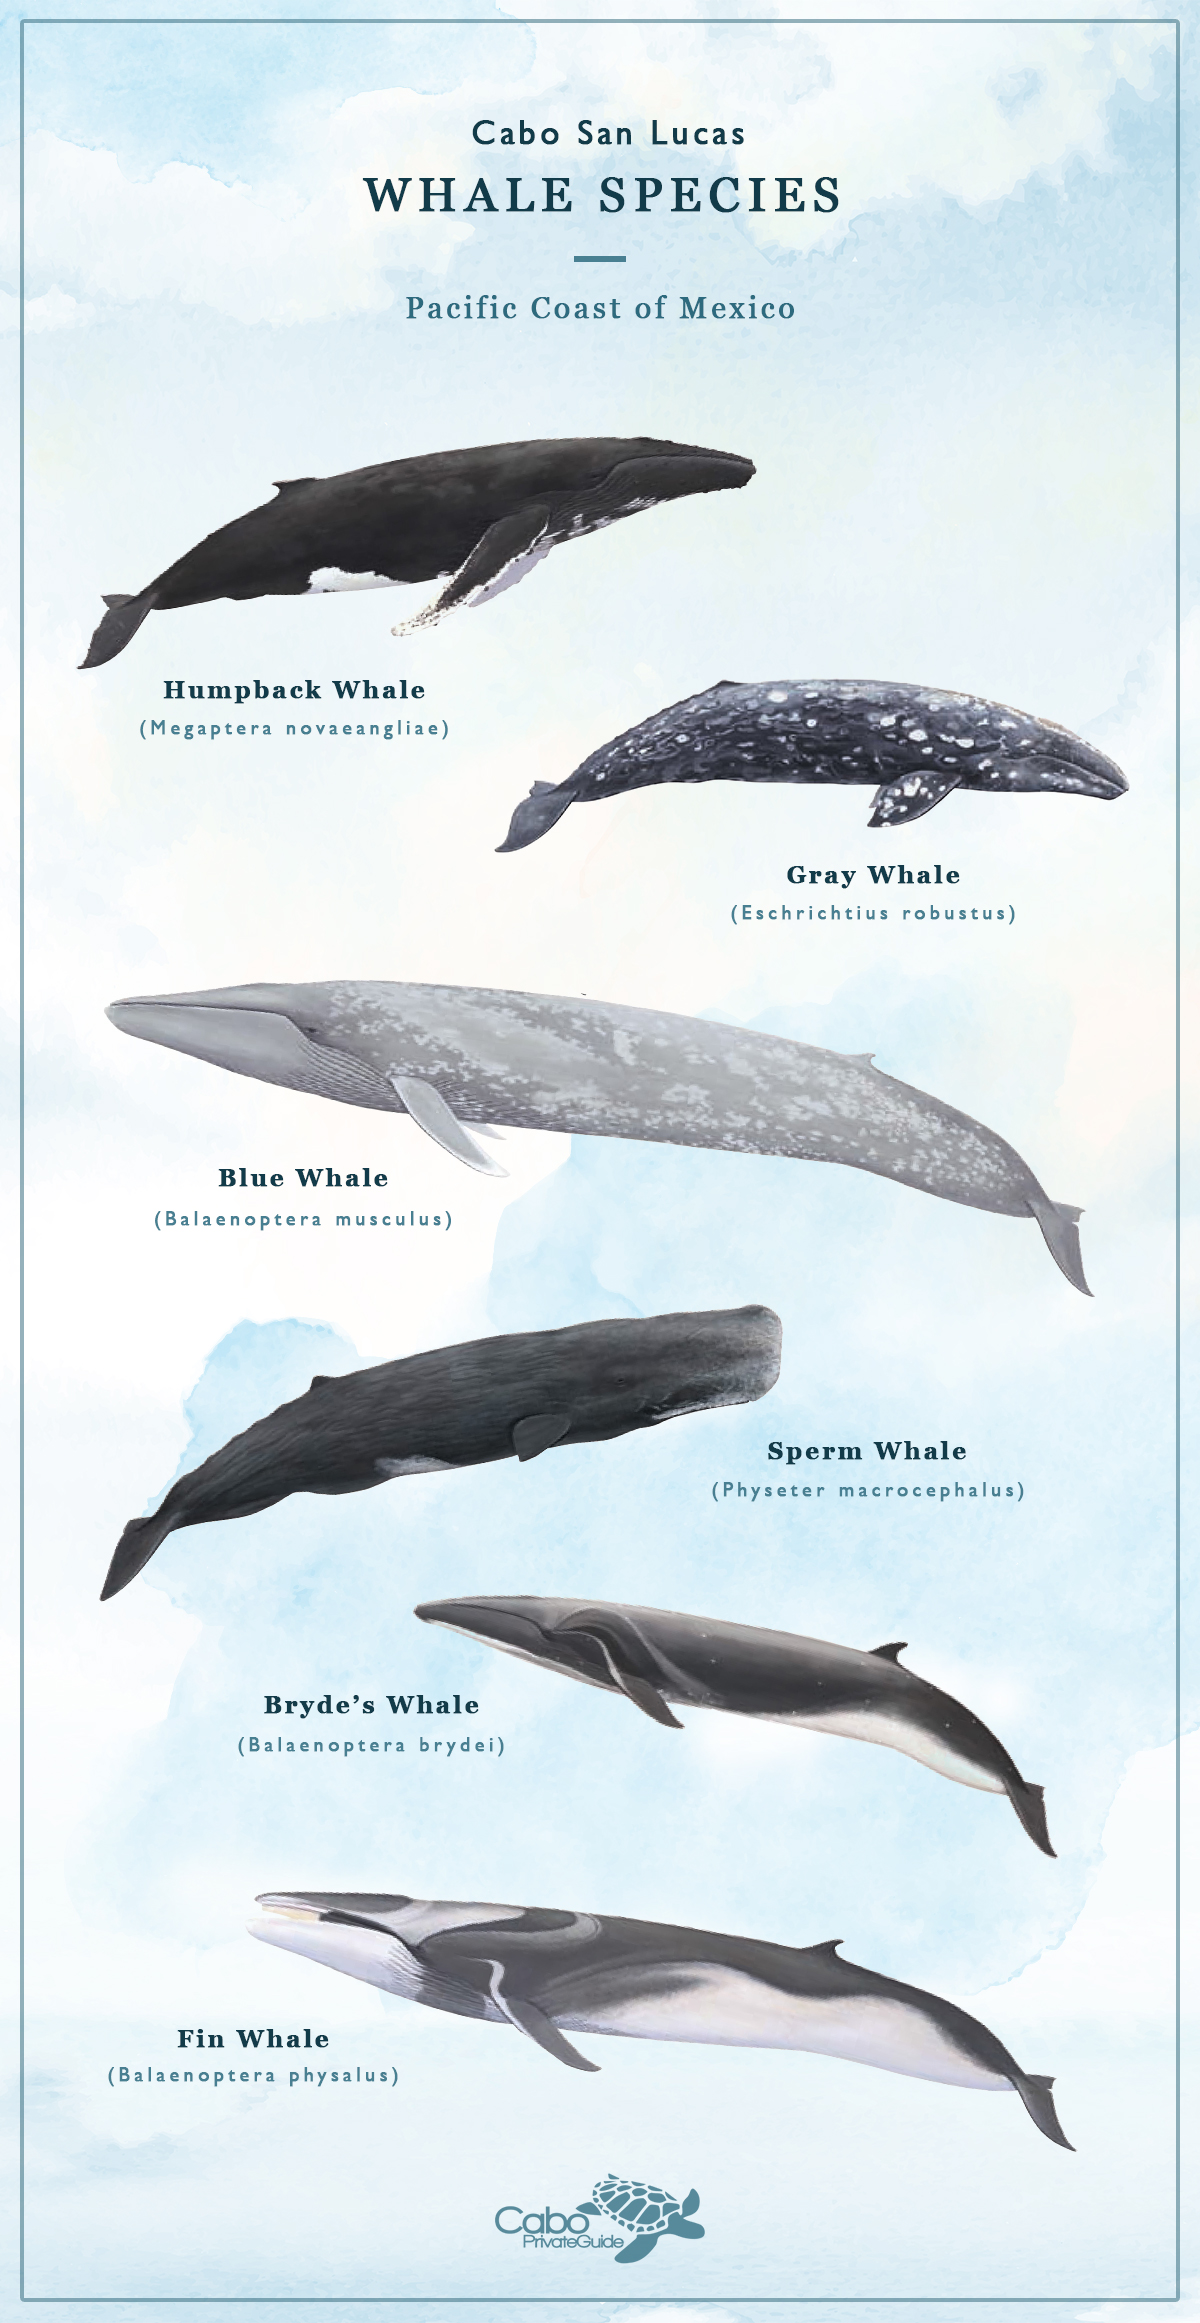 Whale species of Cabo San Lucas